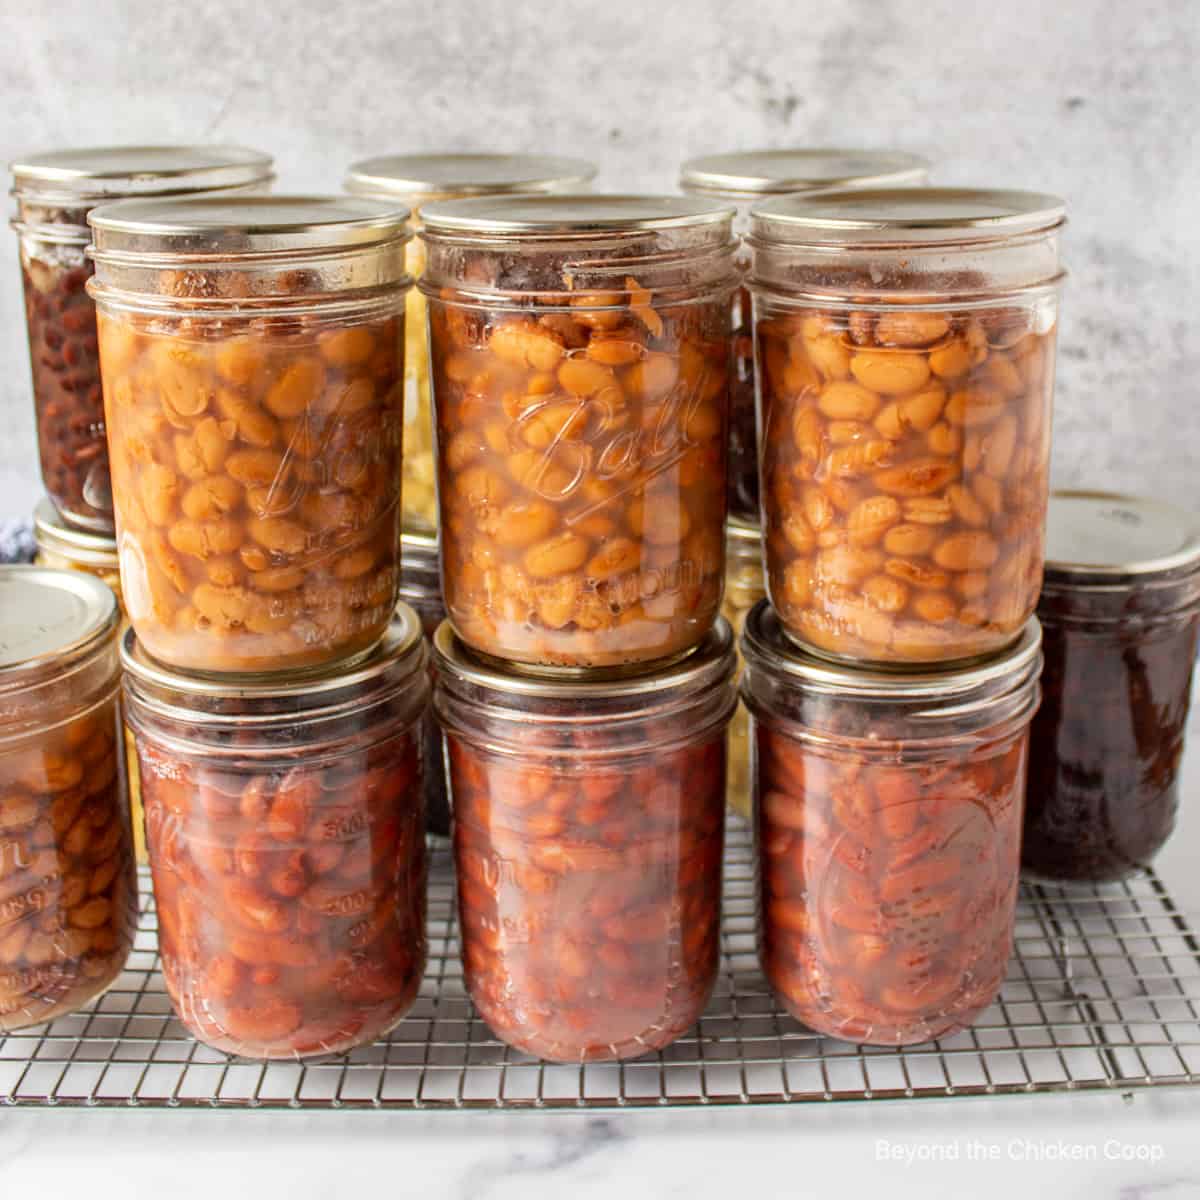 Canning jars filled with kidney and pinto beans.